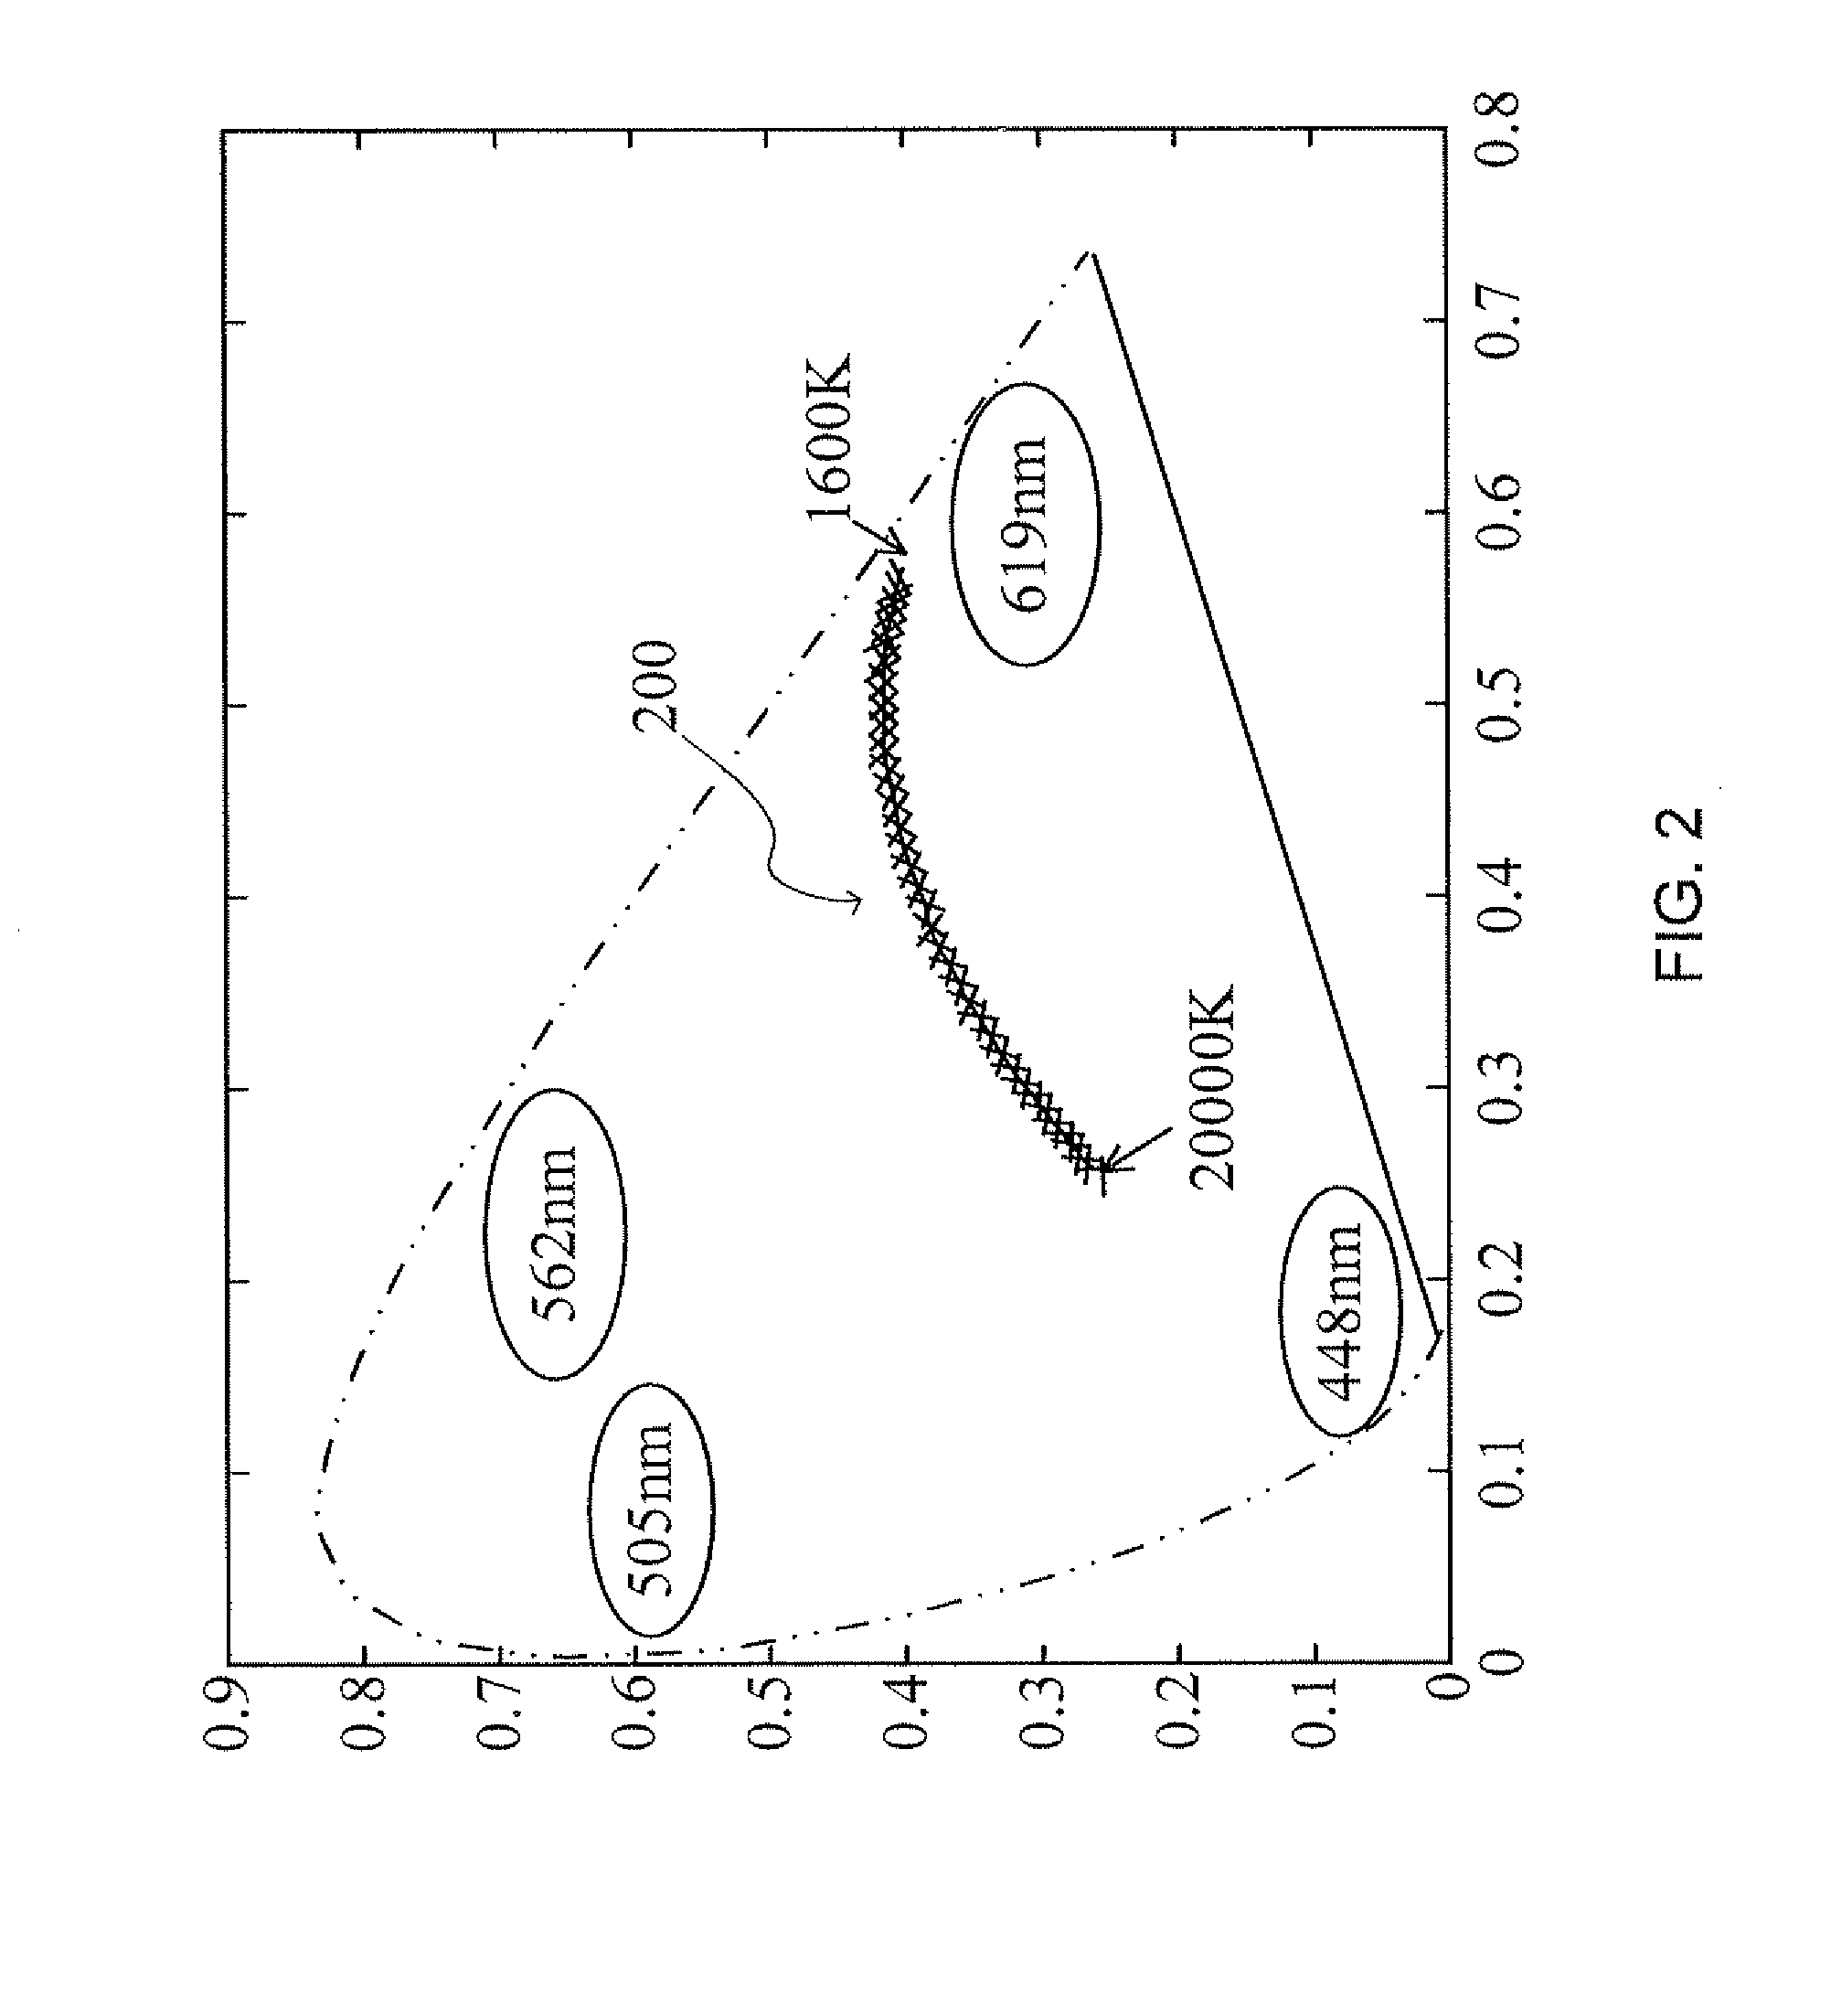 Illumination apparatus with gradually changeable color temperatures